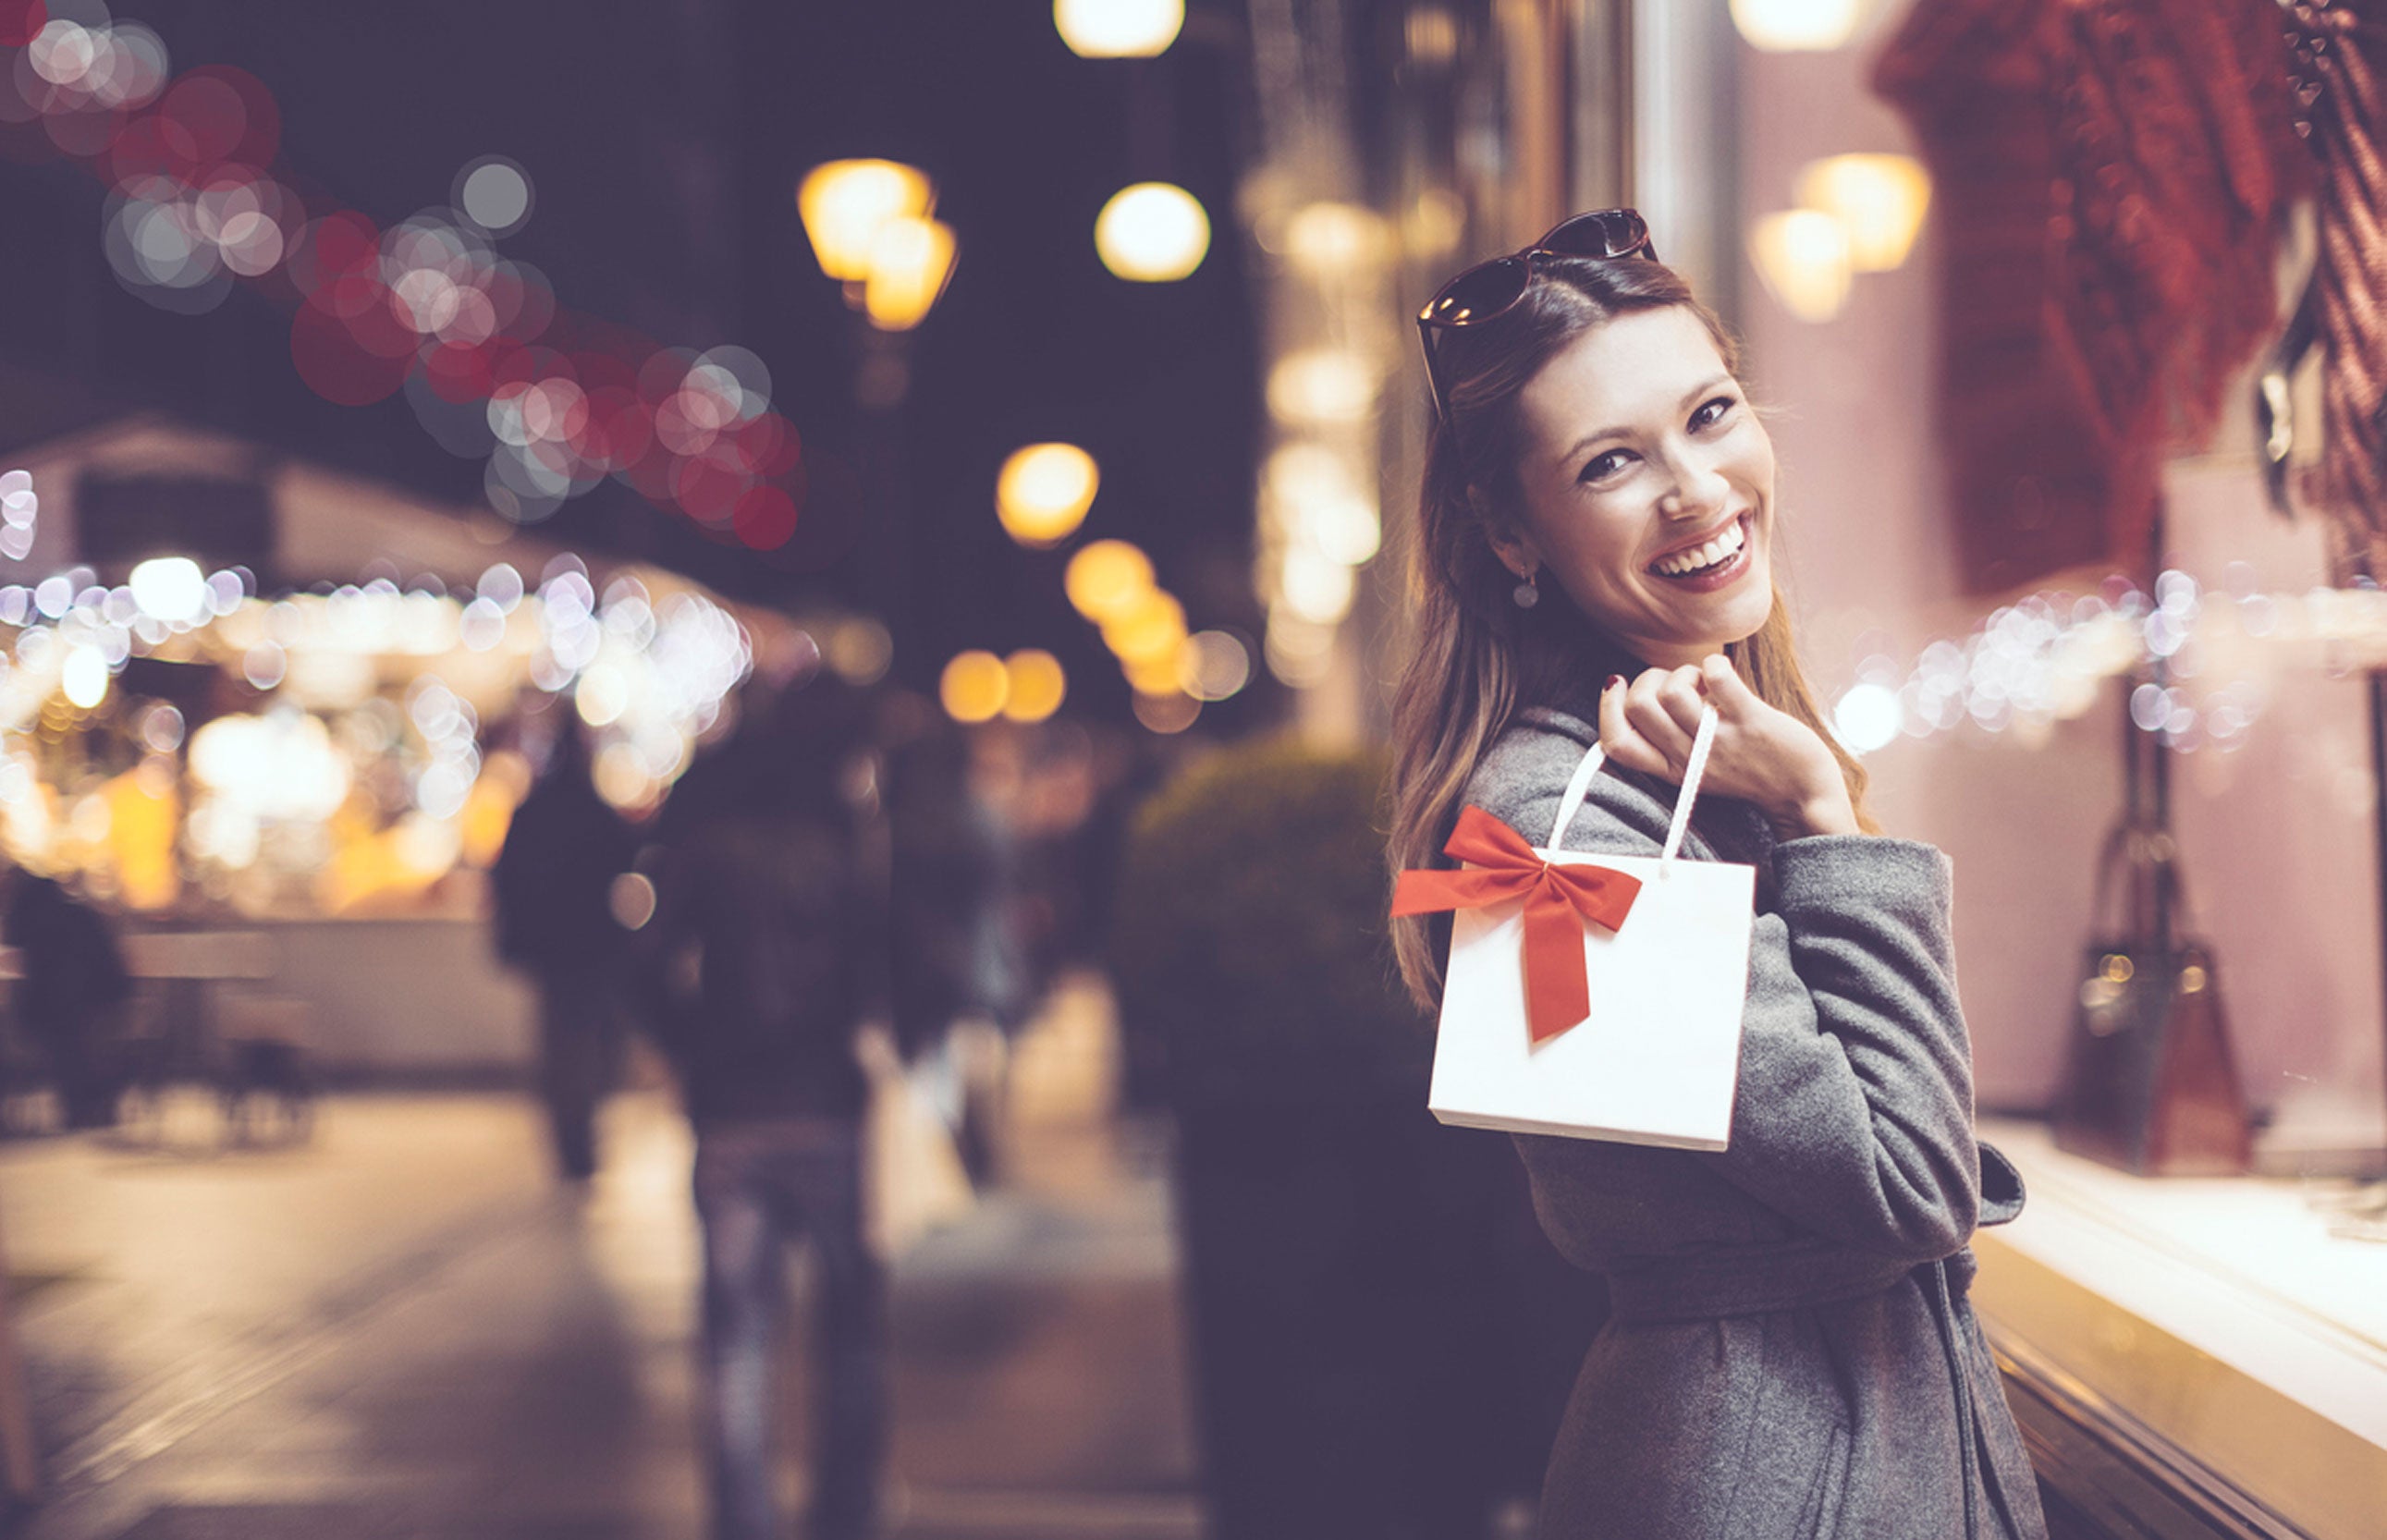 Here are nine ways to protect yourself while shopping this holiday season.